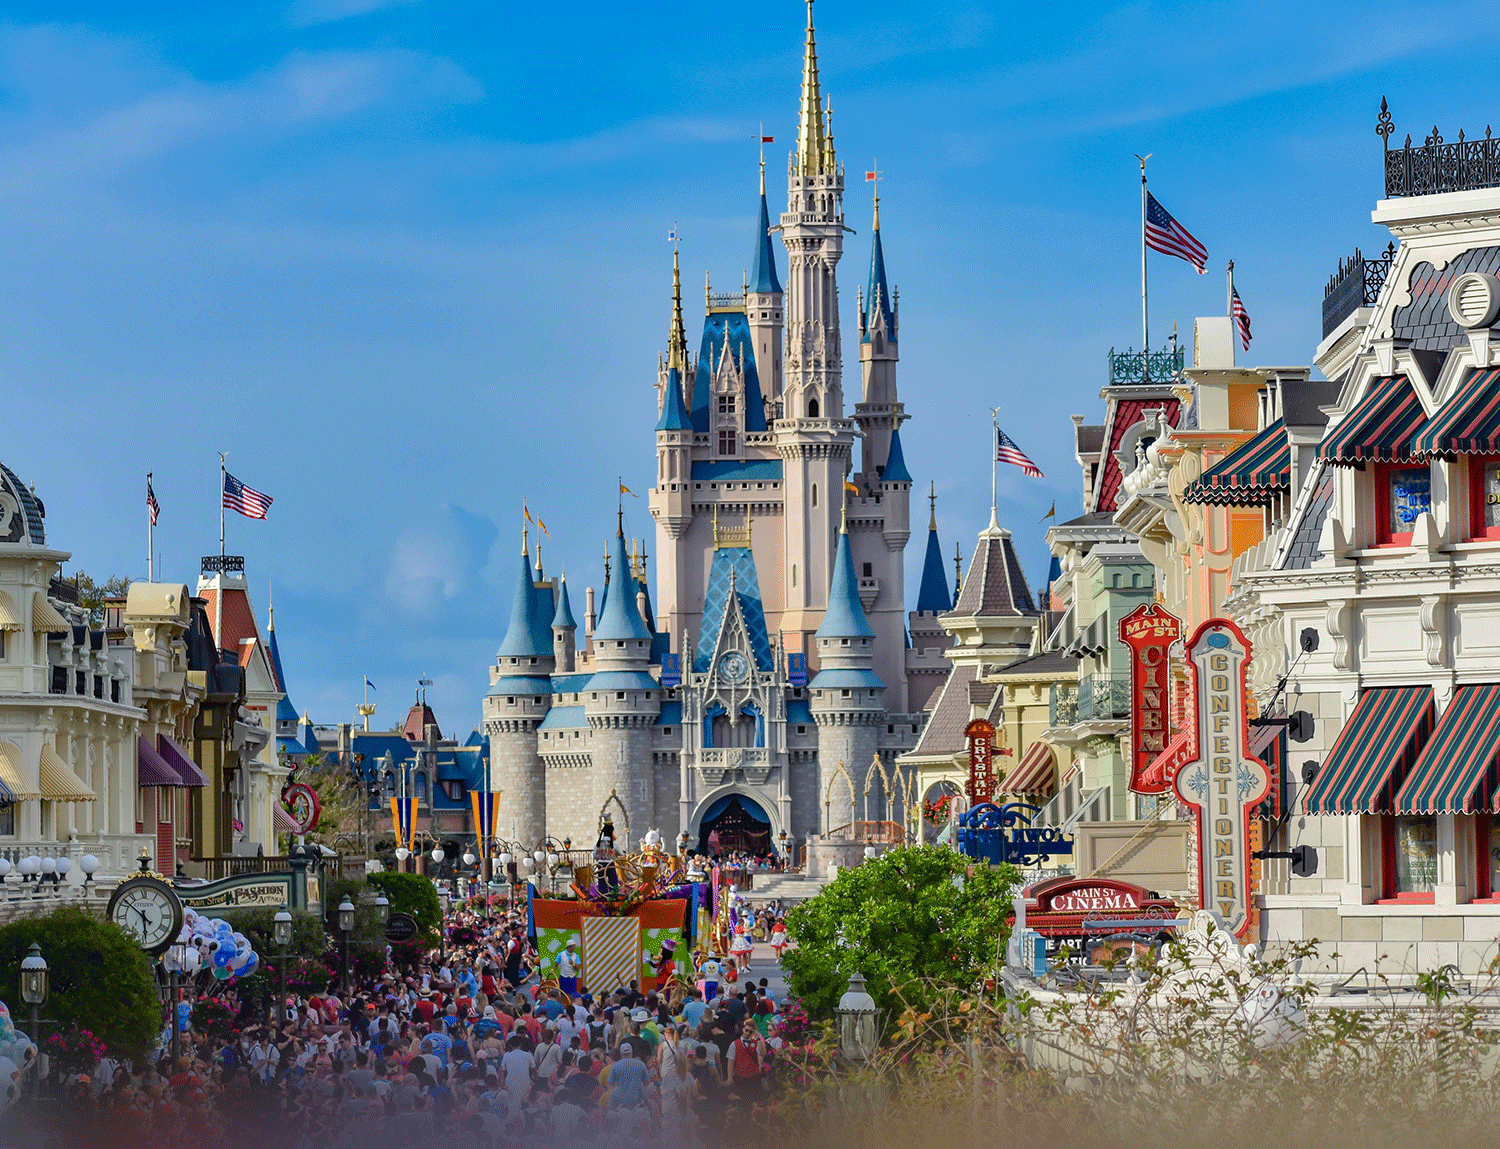 Speech bubbles pop up on a photo of Disney World, saying it smells like popcorn, candy, and royalty.